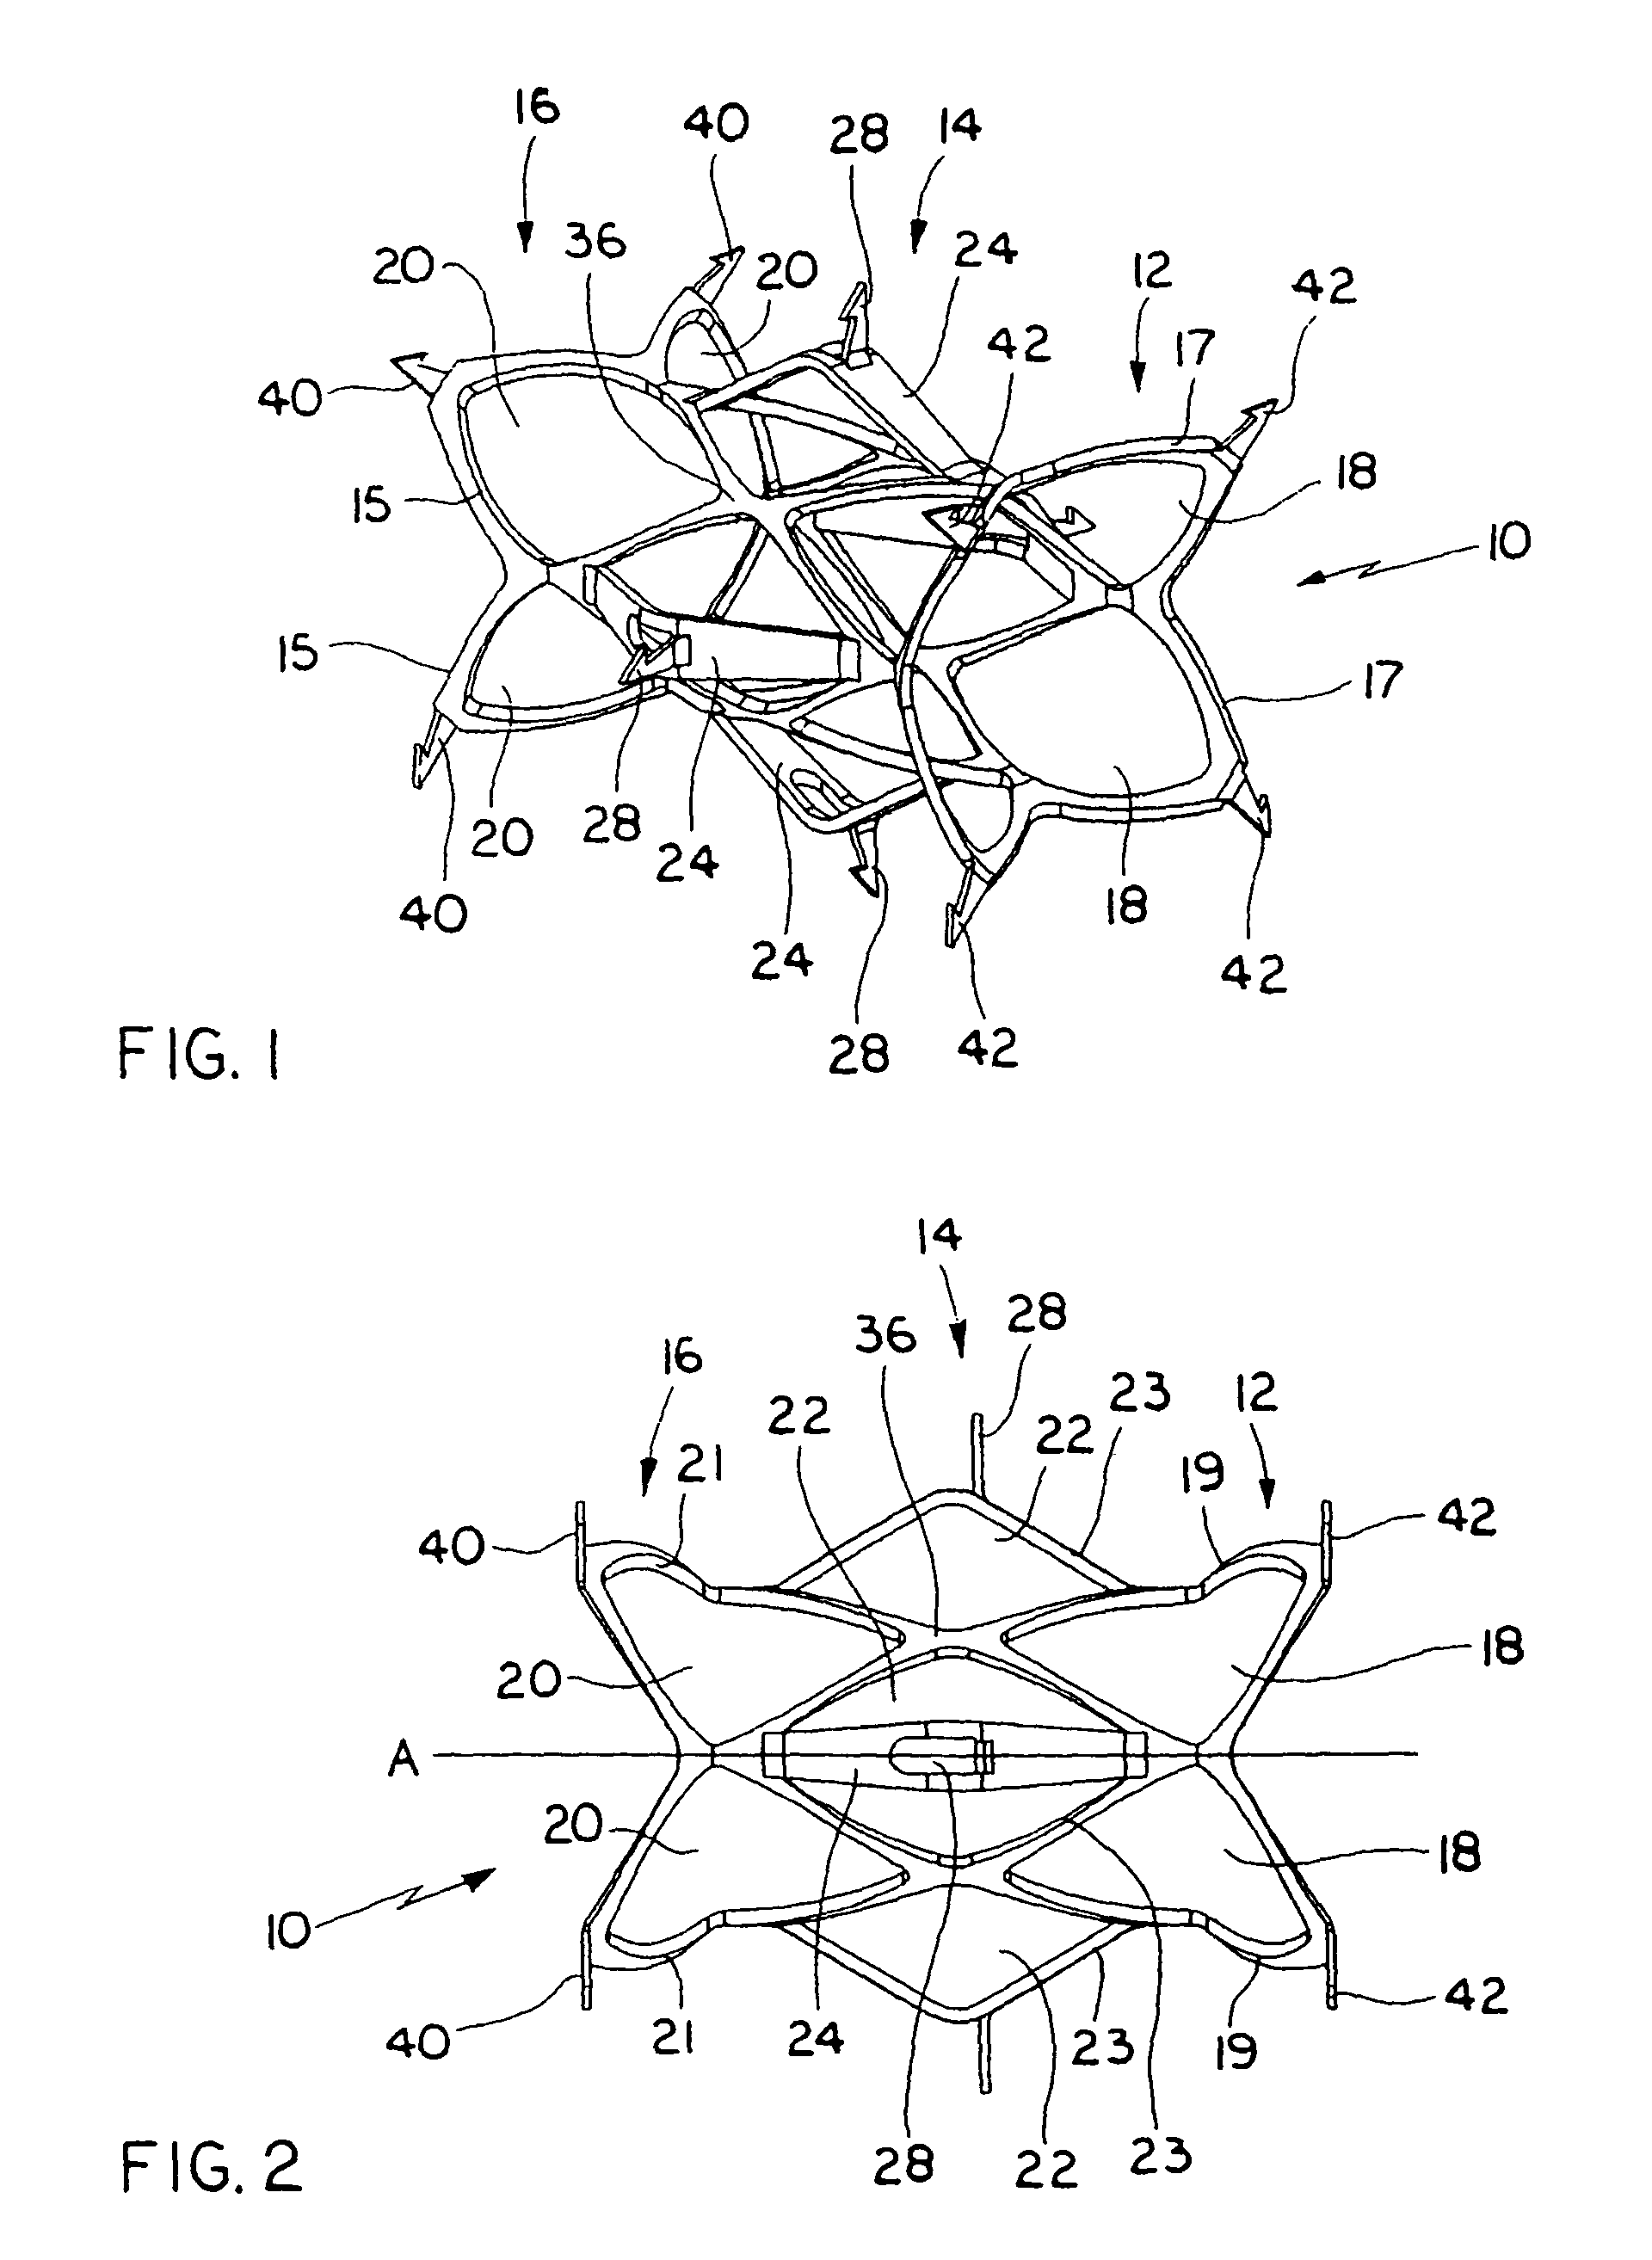 Vascular device with valve for approximating vessel wall